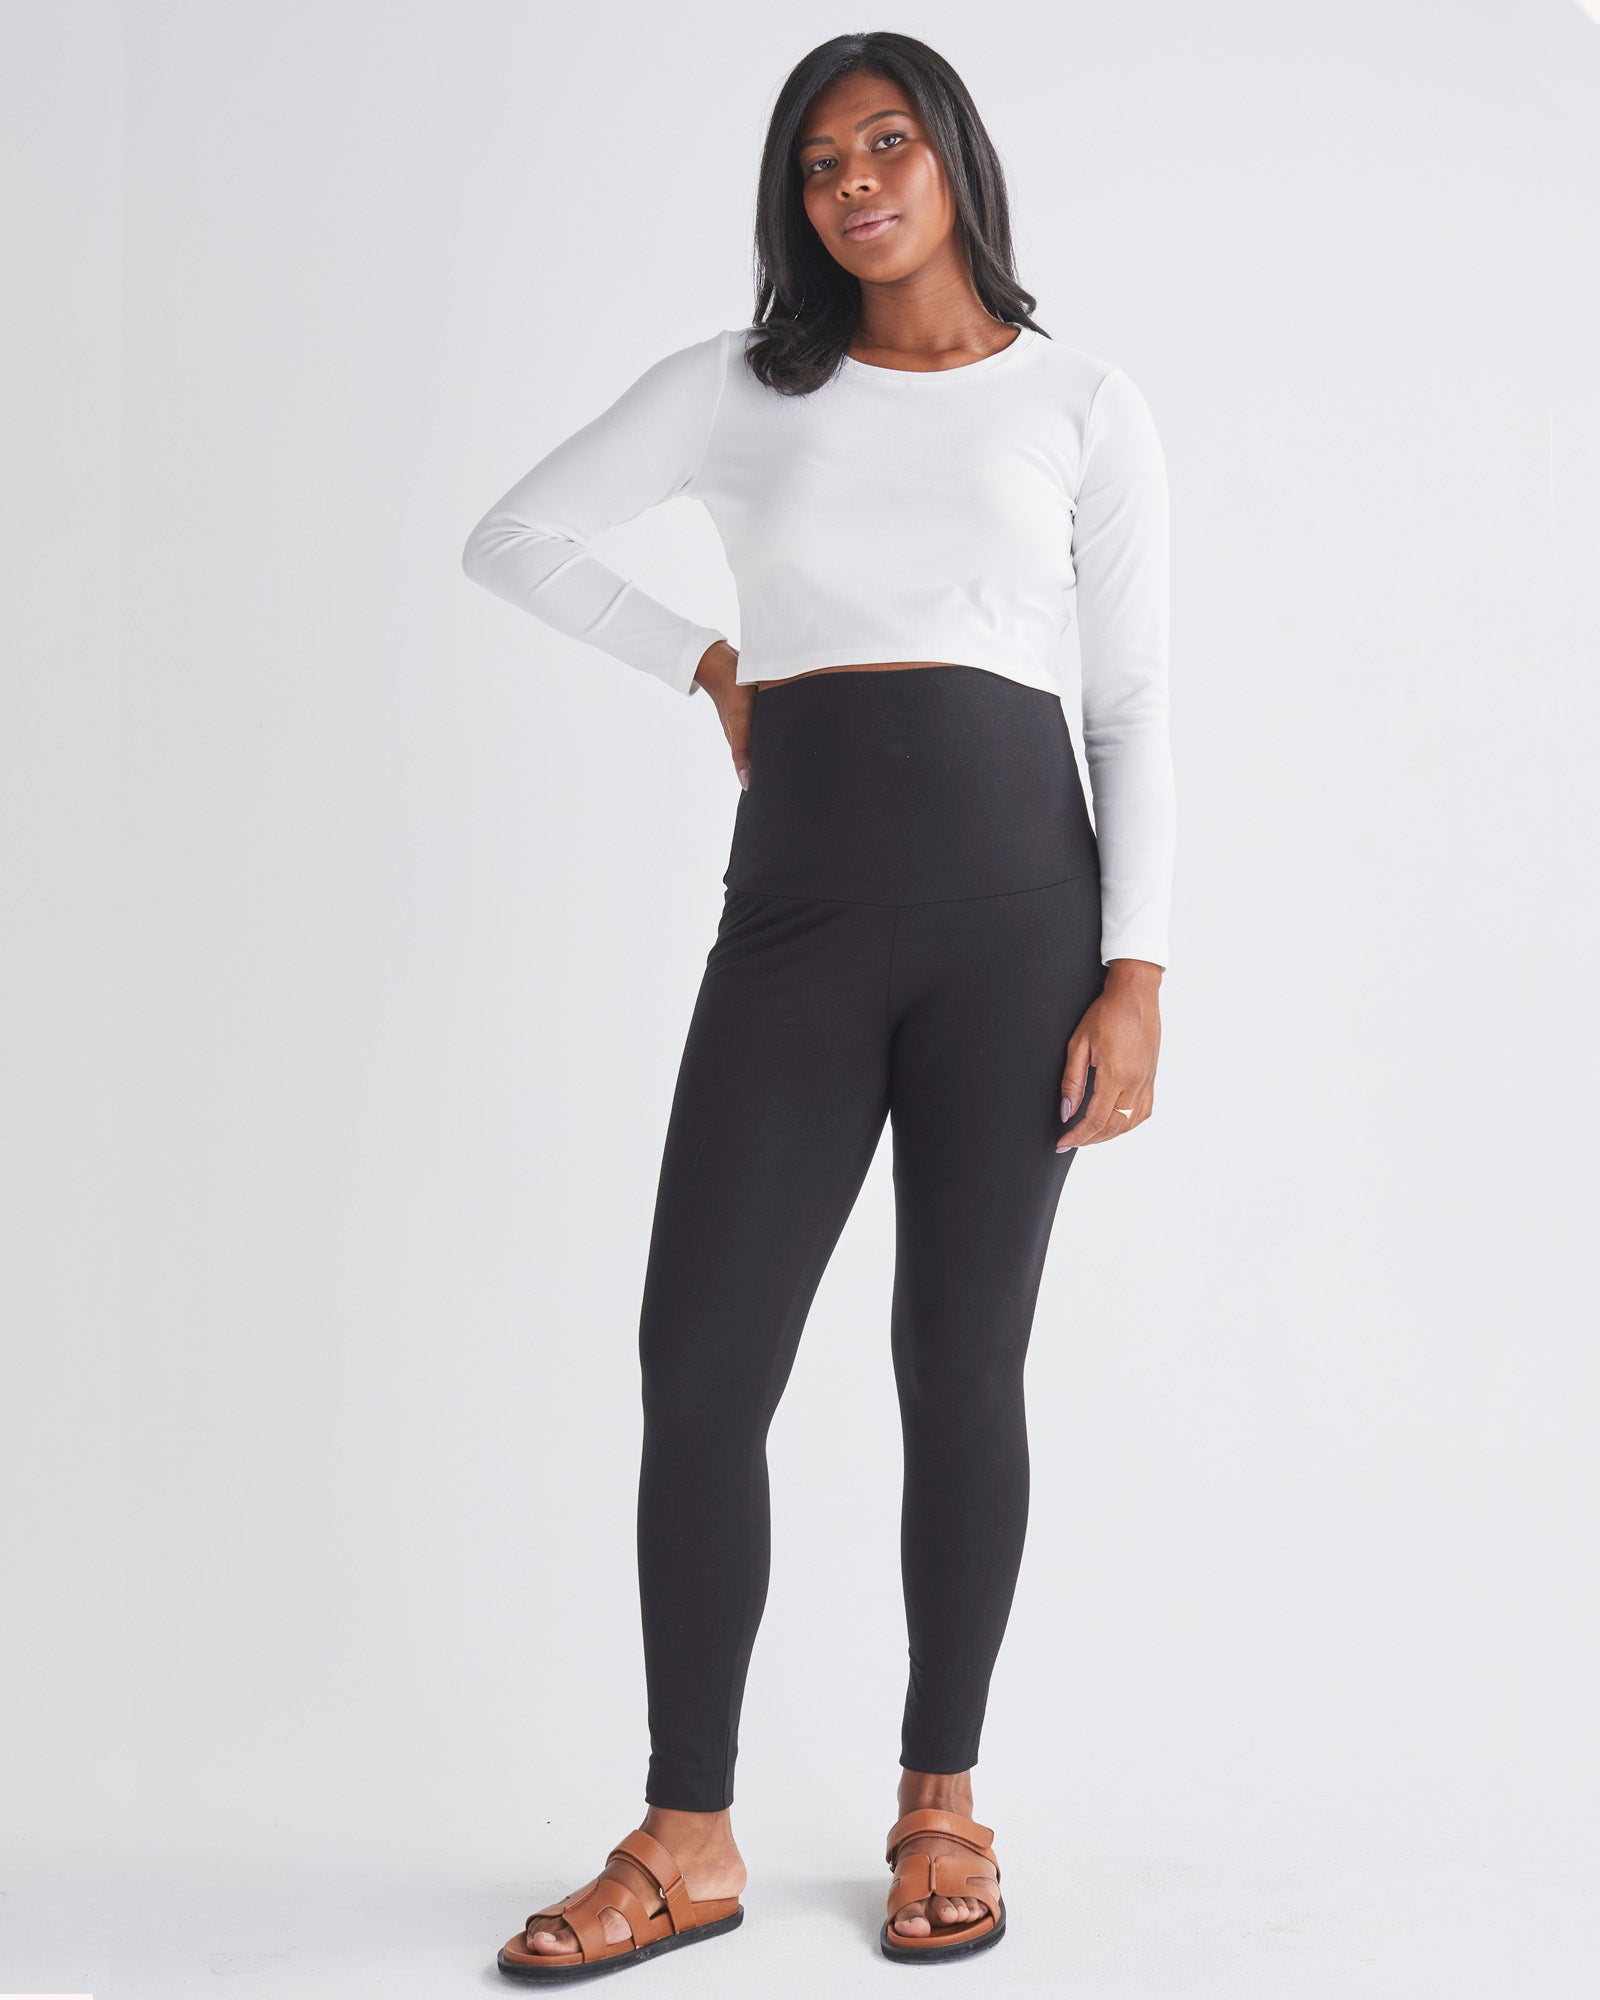 Full Front View - A Pregnant Woman Wearing Maternity Long Sleeve Cotton Crop Tee in White & Black Leggings from Angel Maternity